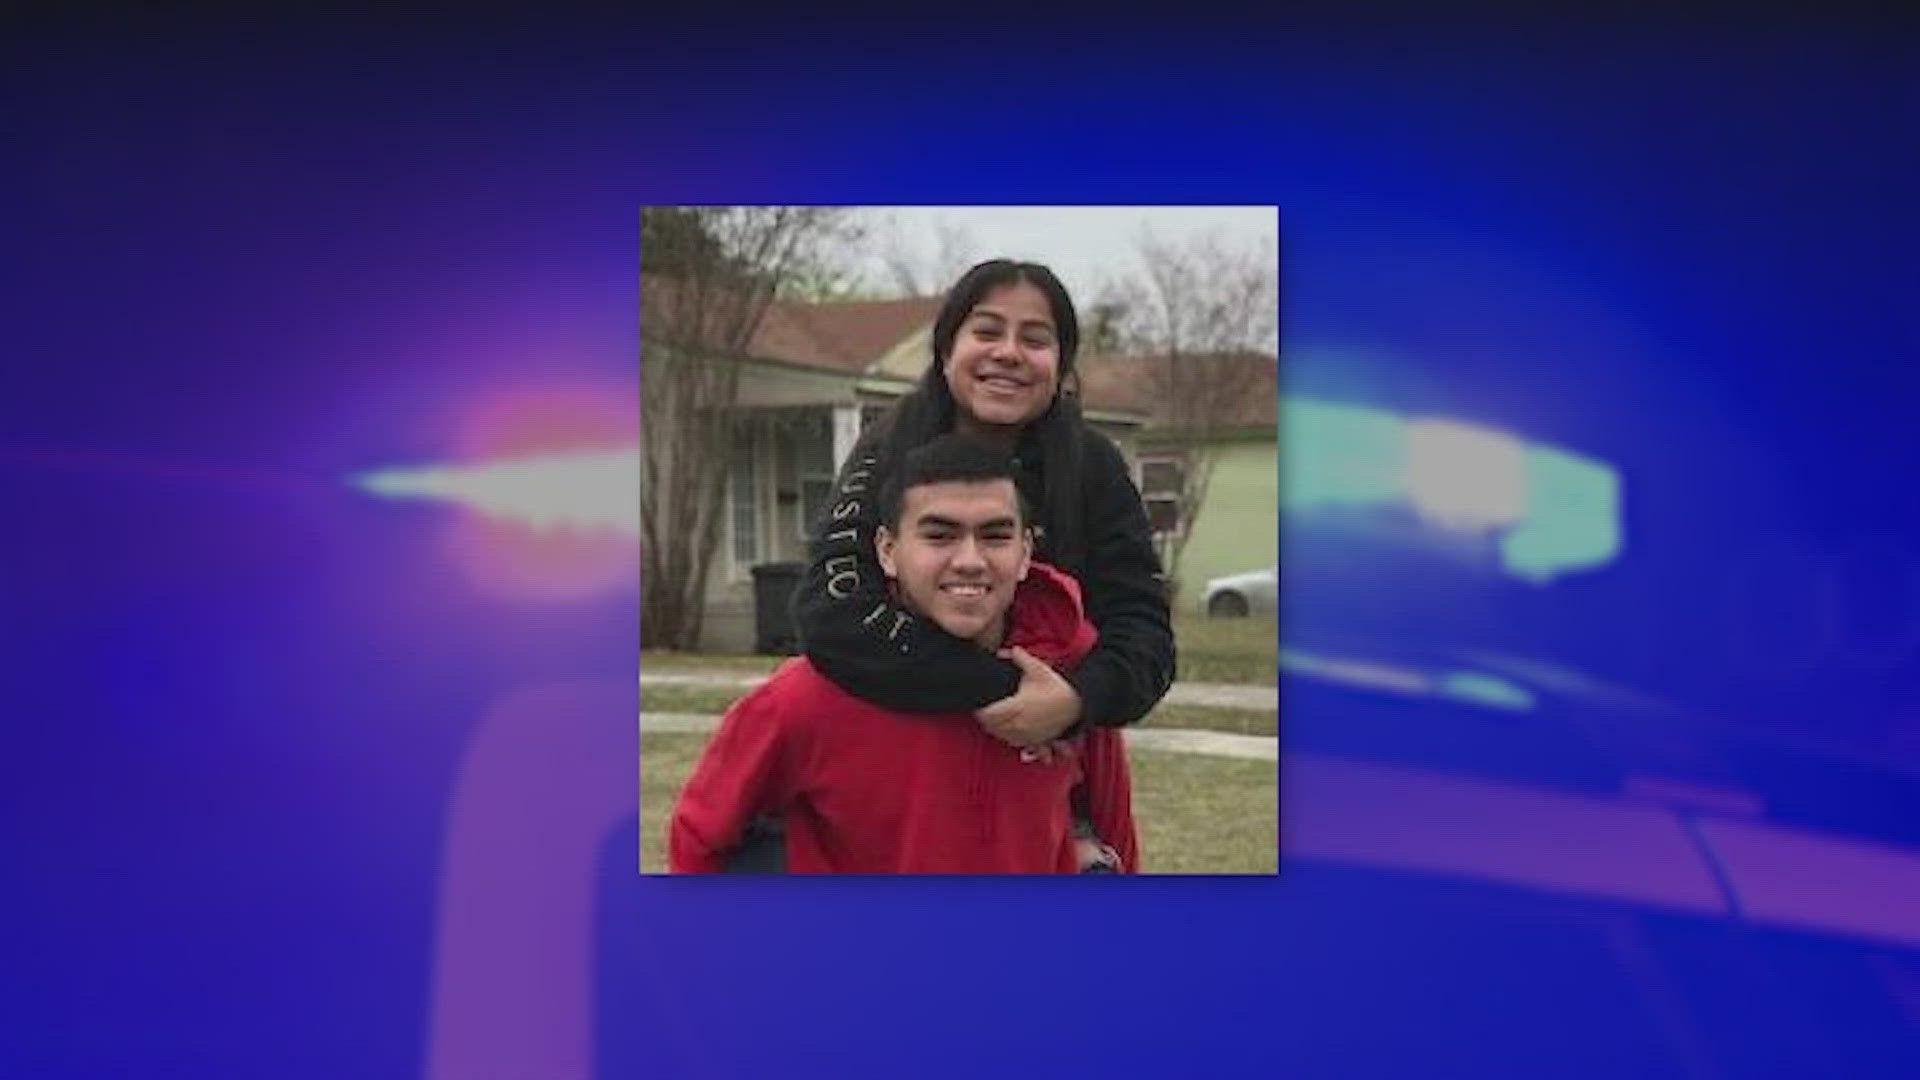 The two were killed in their car during a reported drug deal on the southeast side.